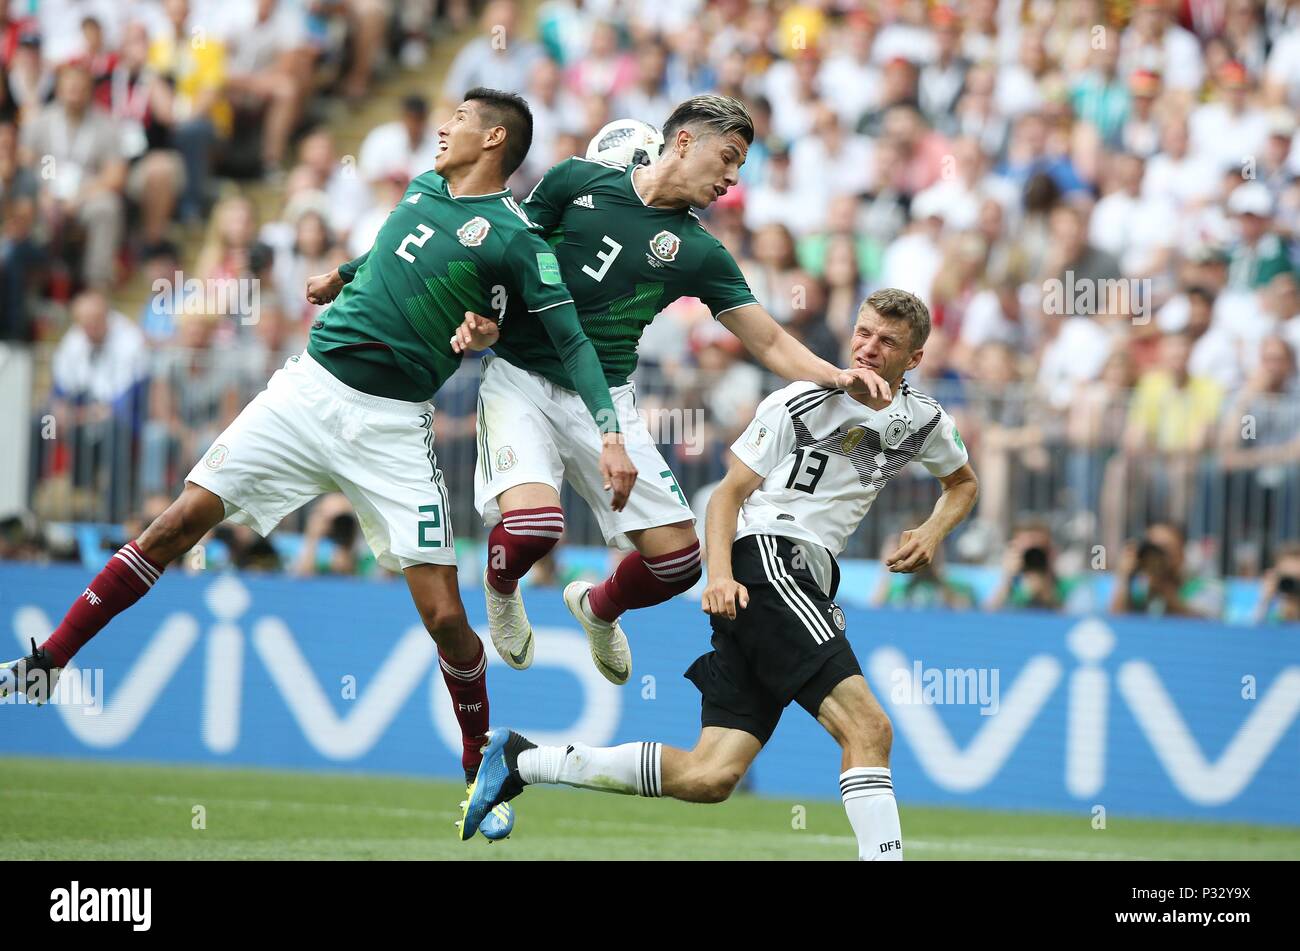 Moscow, Russia. 17th June, 2018. firo: 17.06.2018, Moscow, Football, Soccer,  Germany - Mexico, Mexico Hugo Ayala and Carlos Salcedo versus Thomas MULLER | usage worldwide Credit: dpa/Alamy Live News Stock Photo